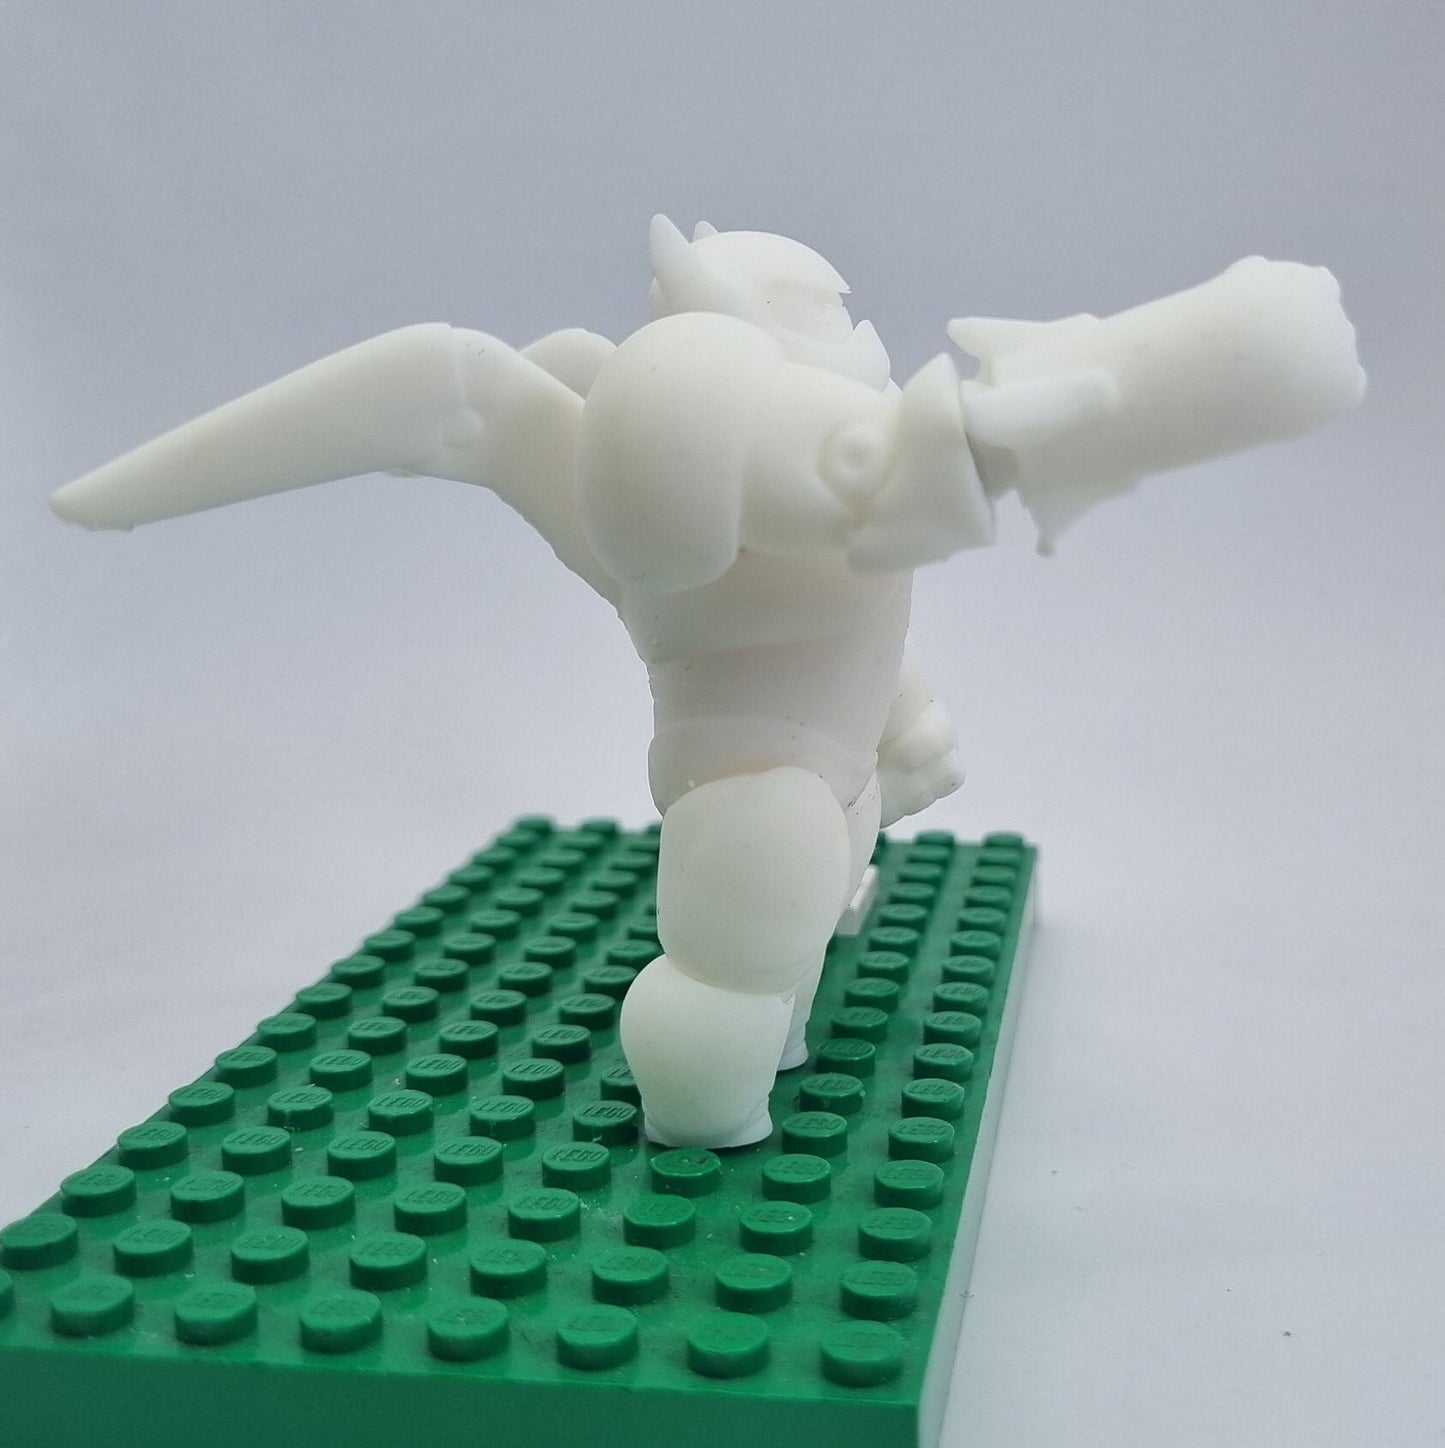 Custom 3D printed building toy big white marshmallow balloon character with armor bigfig!